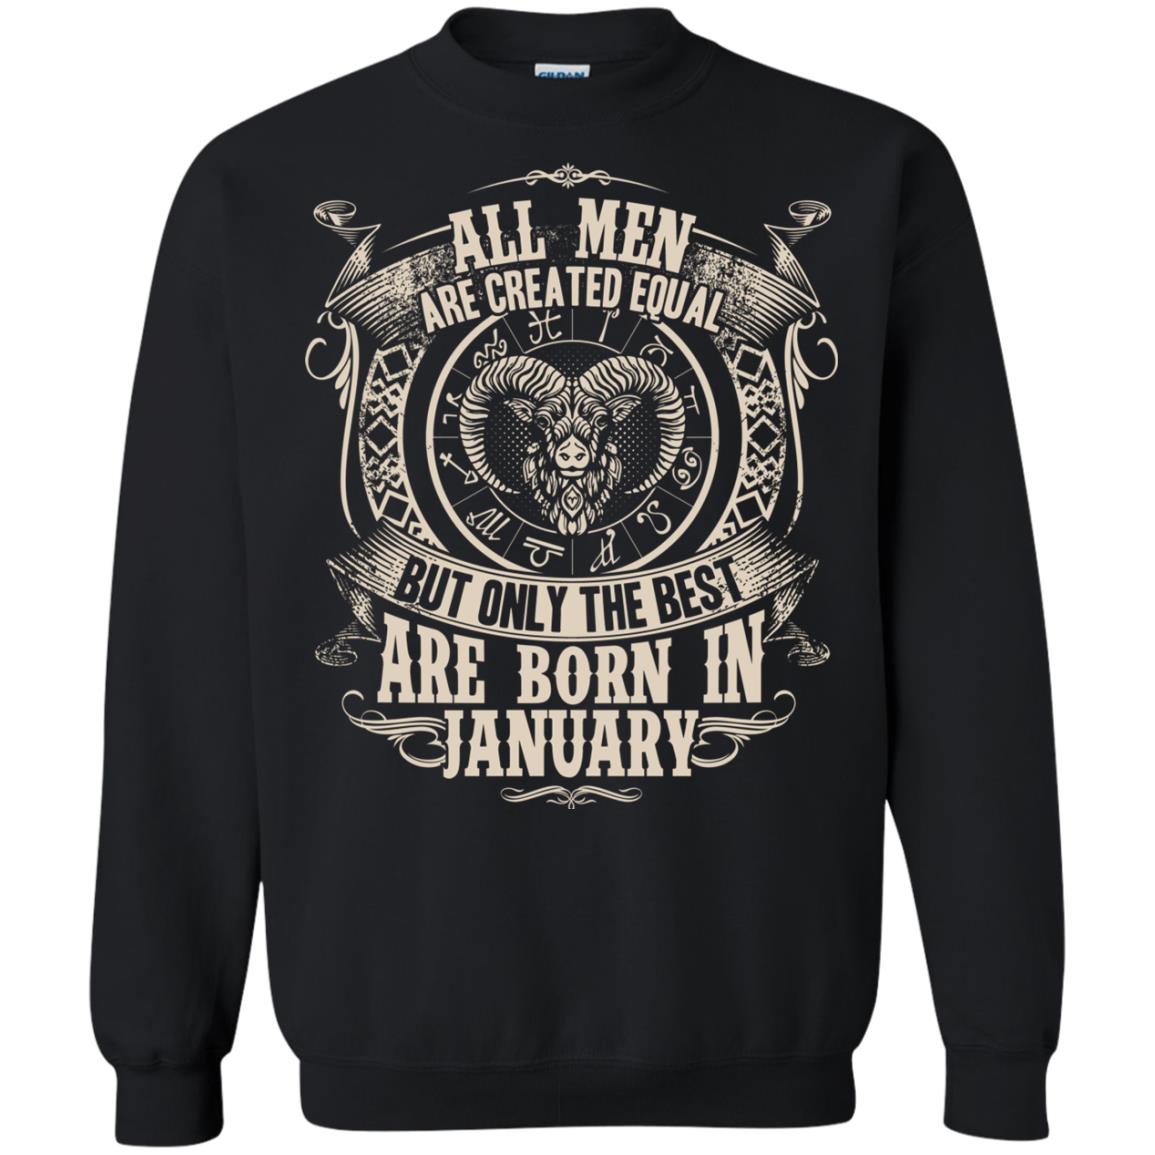 All Men Are Created Equal, But Only The Best Are Born In January T-shirtG180 Gildan Crewneck Pullover Sweatshirt 8 oz.